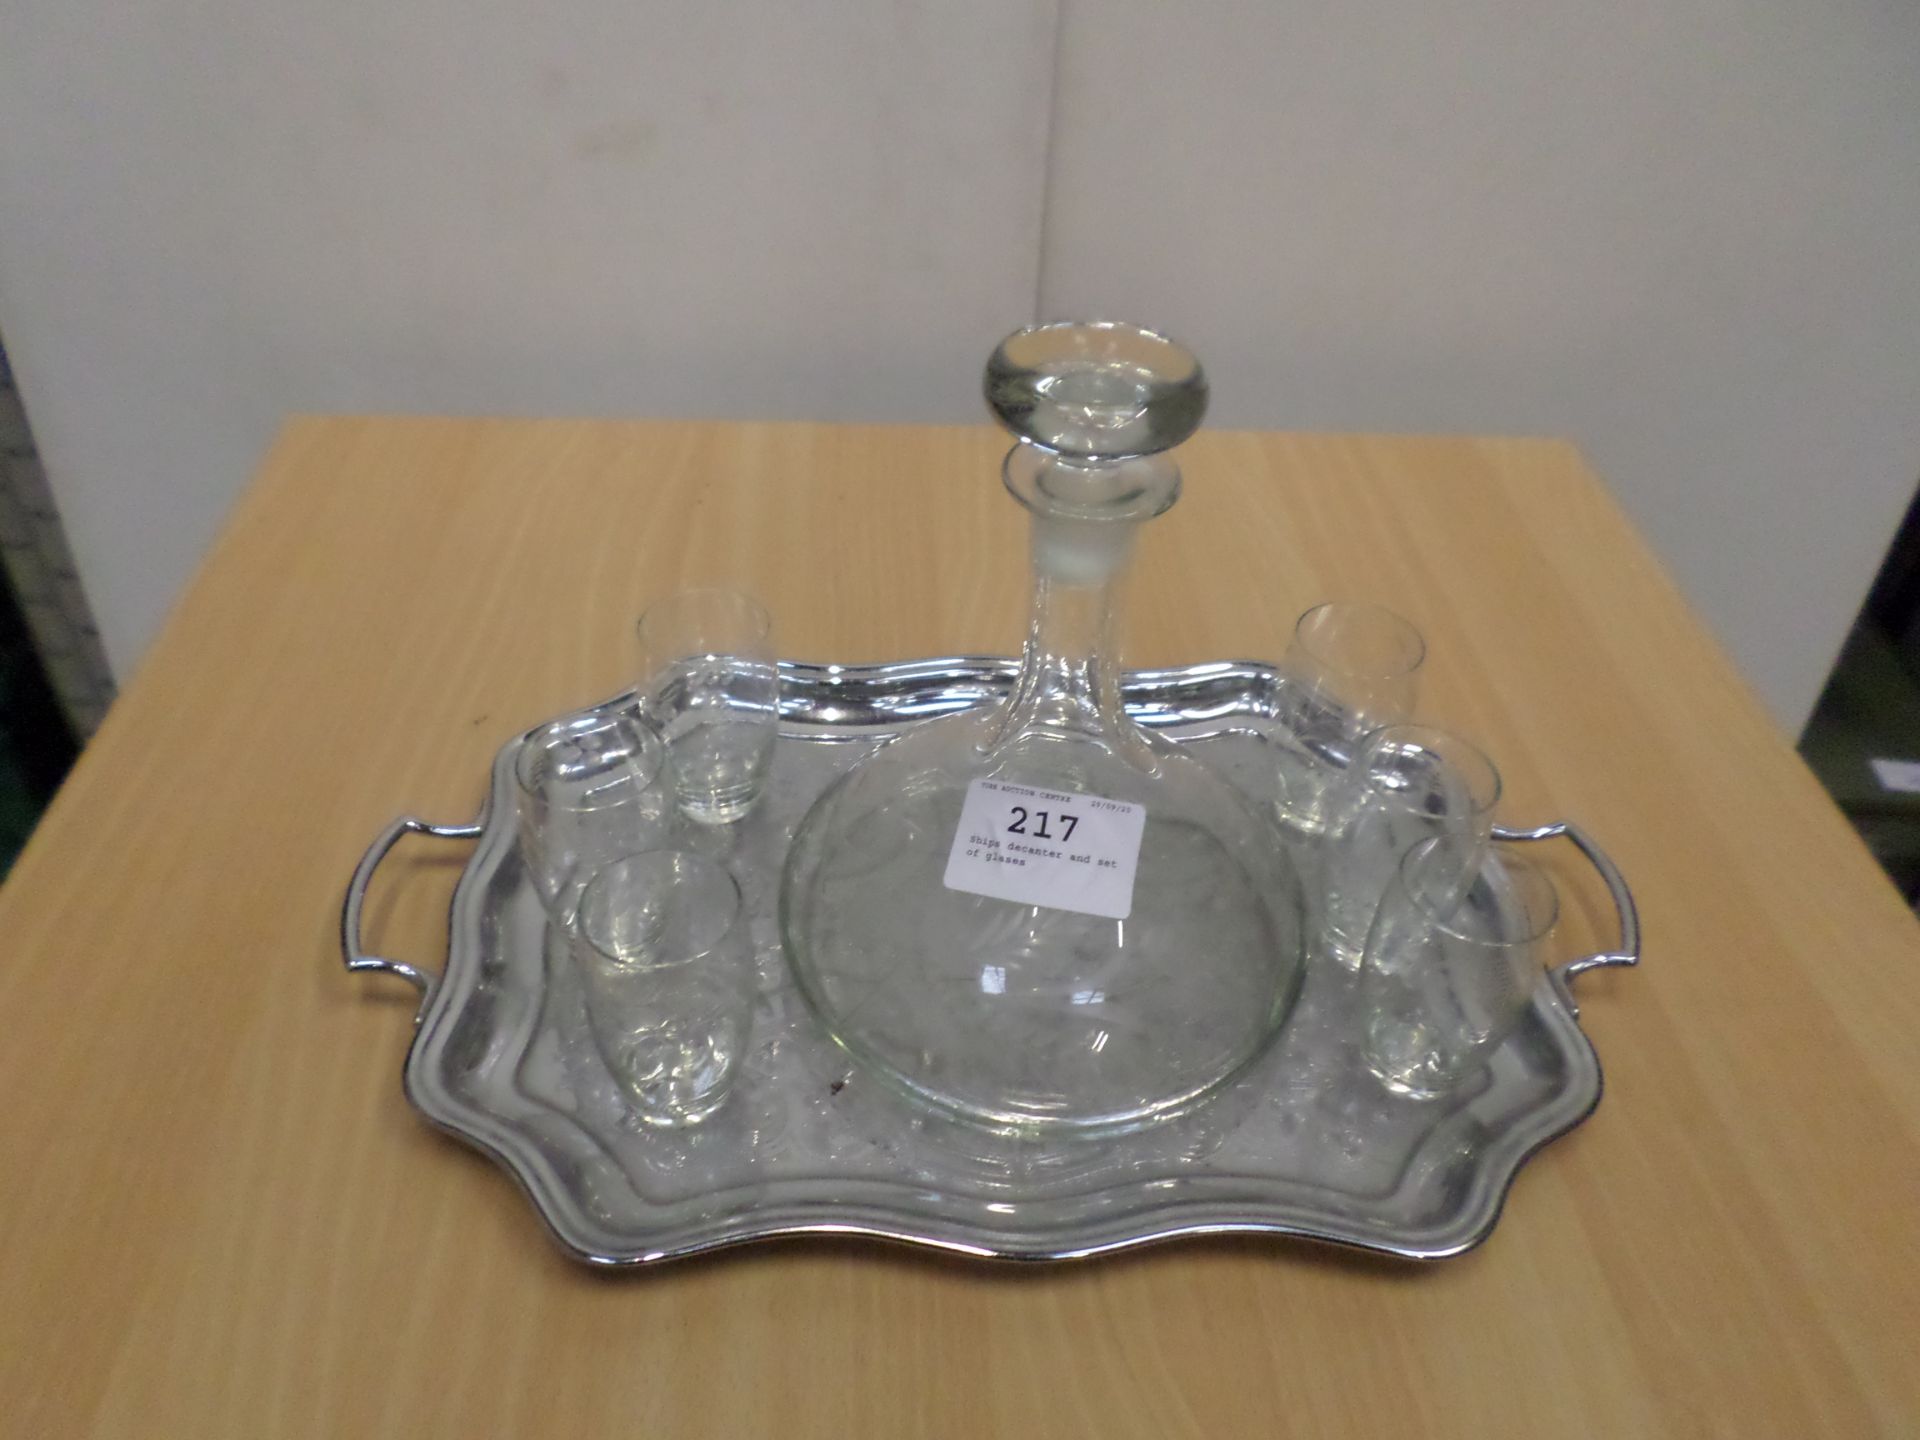 Ships decanter and set of glases